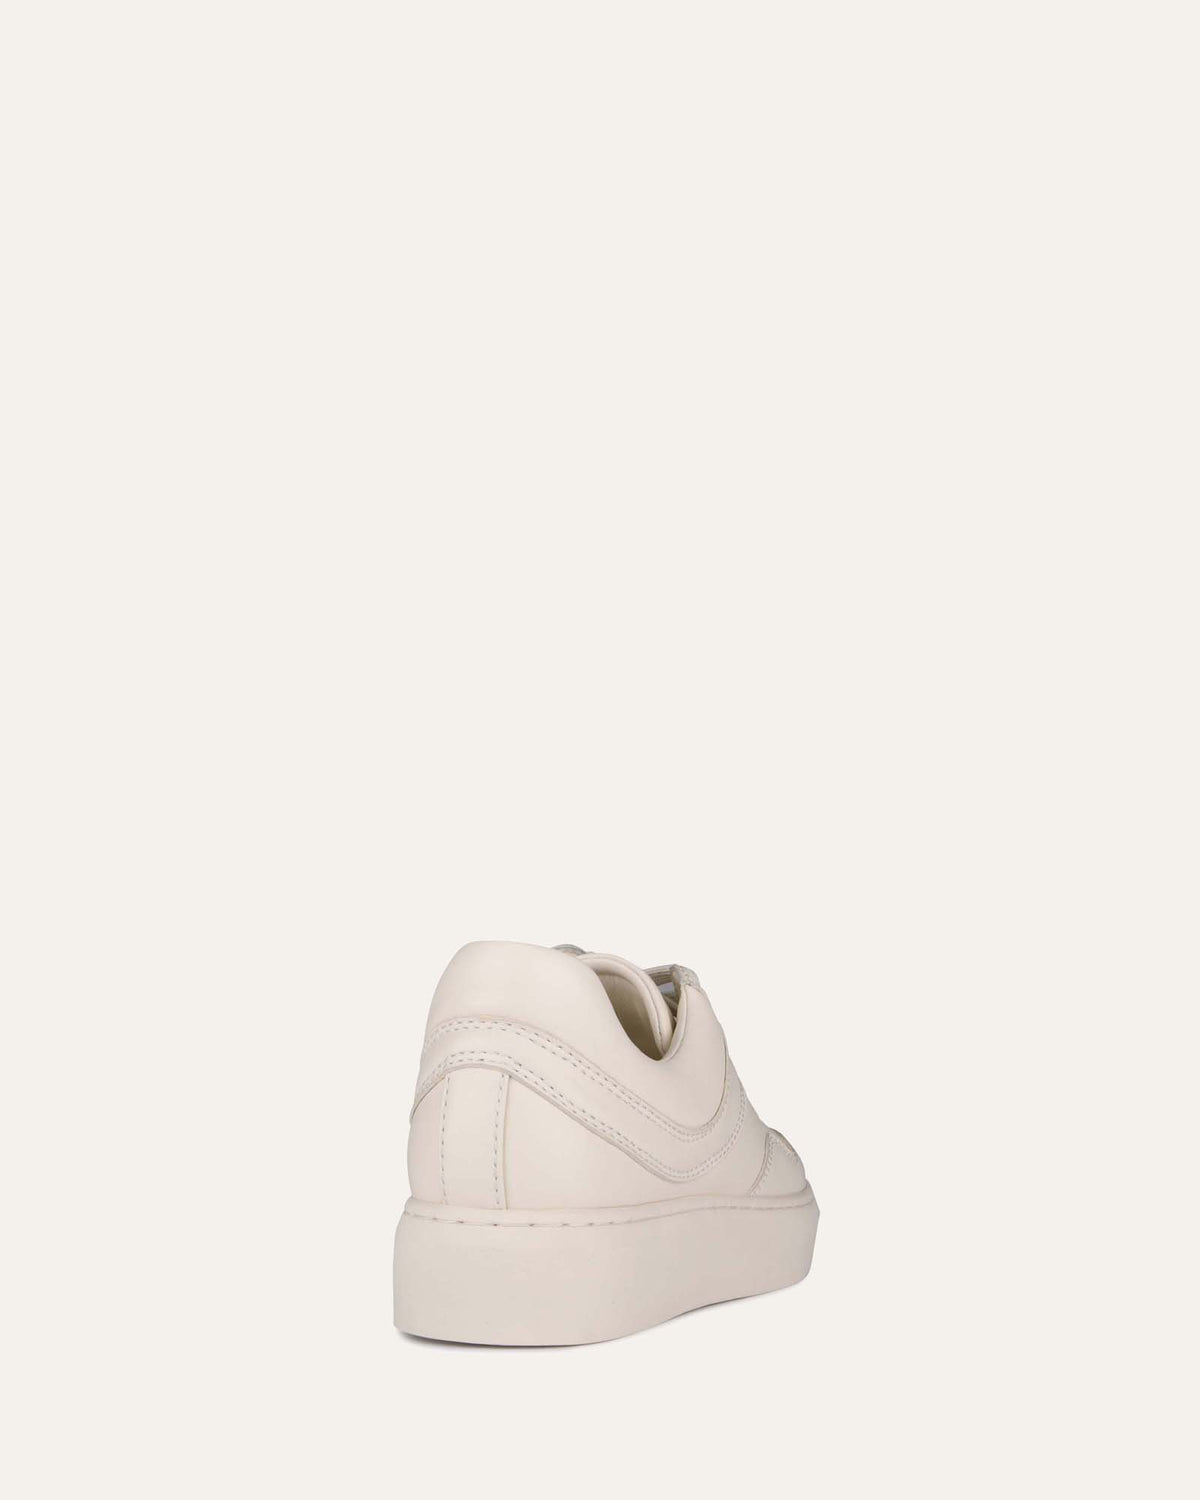 HALLE SNEAKERS OFF WHITE LEATHER